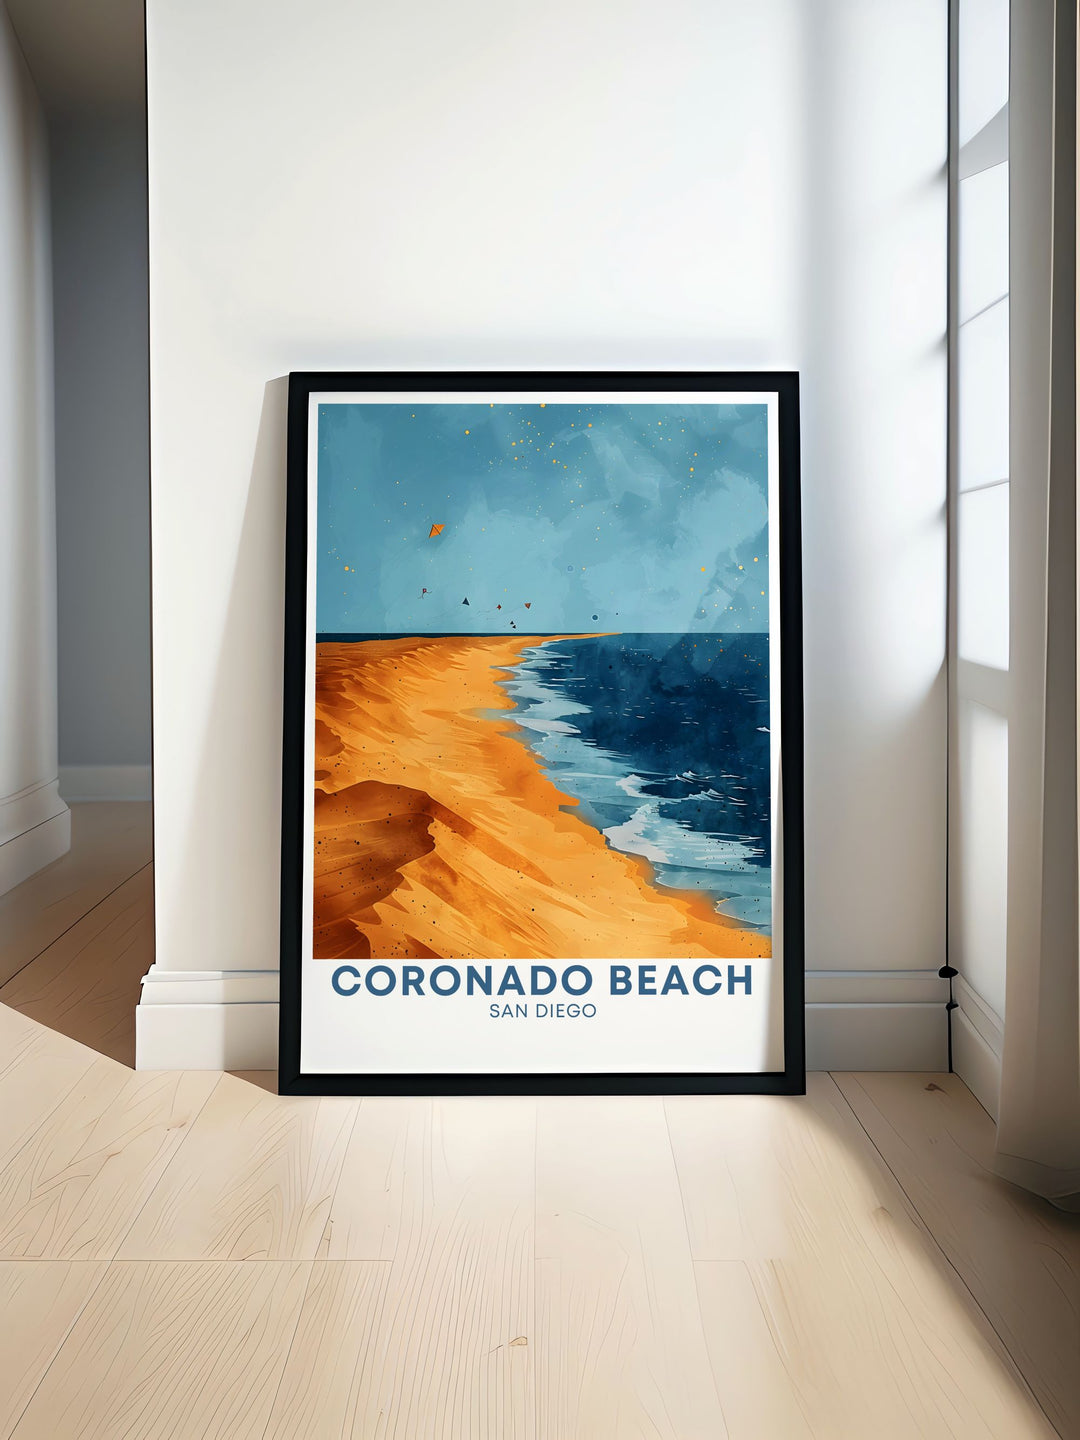 Stunning Colorado Art featuring Vail Ski and Sand Dunes. Perfect for adding elegance to any room this Colorado decor captures the beauty of the Rockies and the majestic Sand Dunes in vibrant detail creating a captivating visual experience.